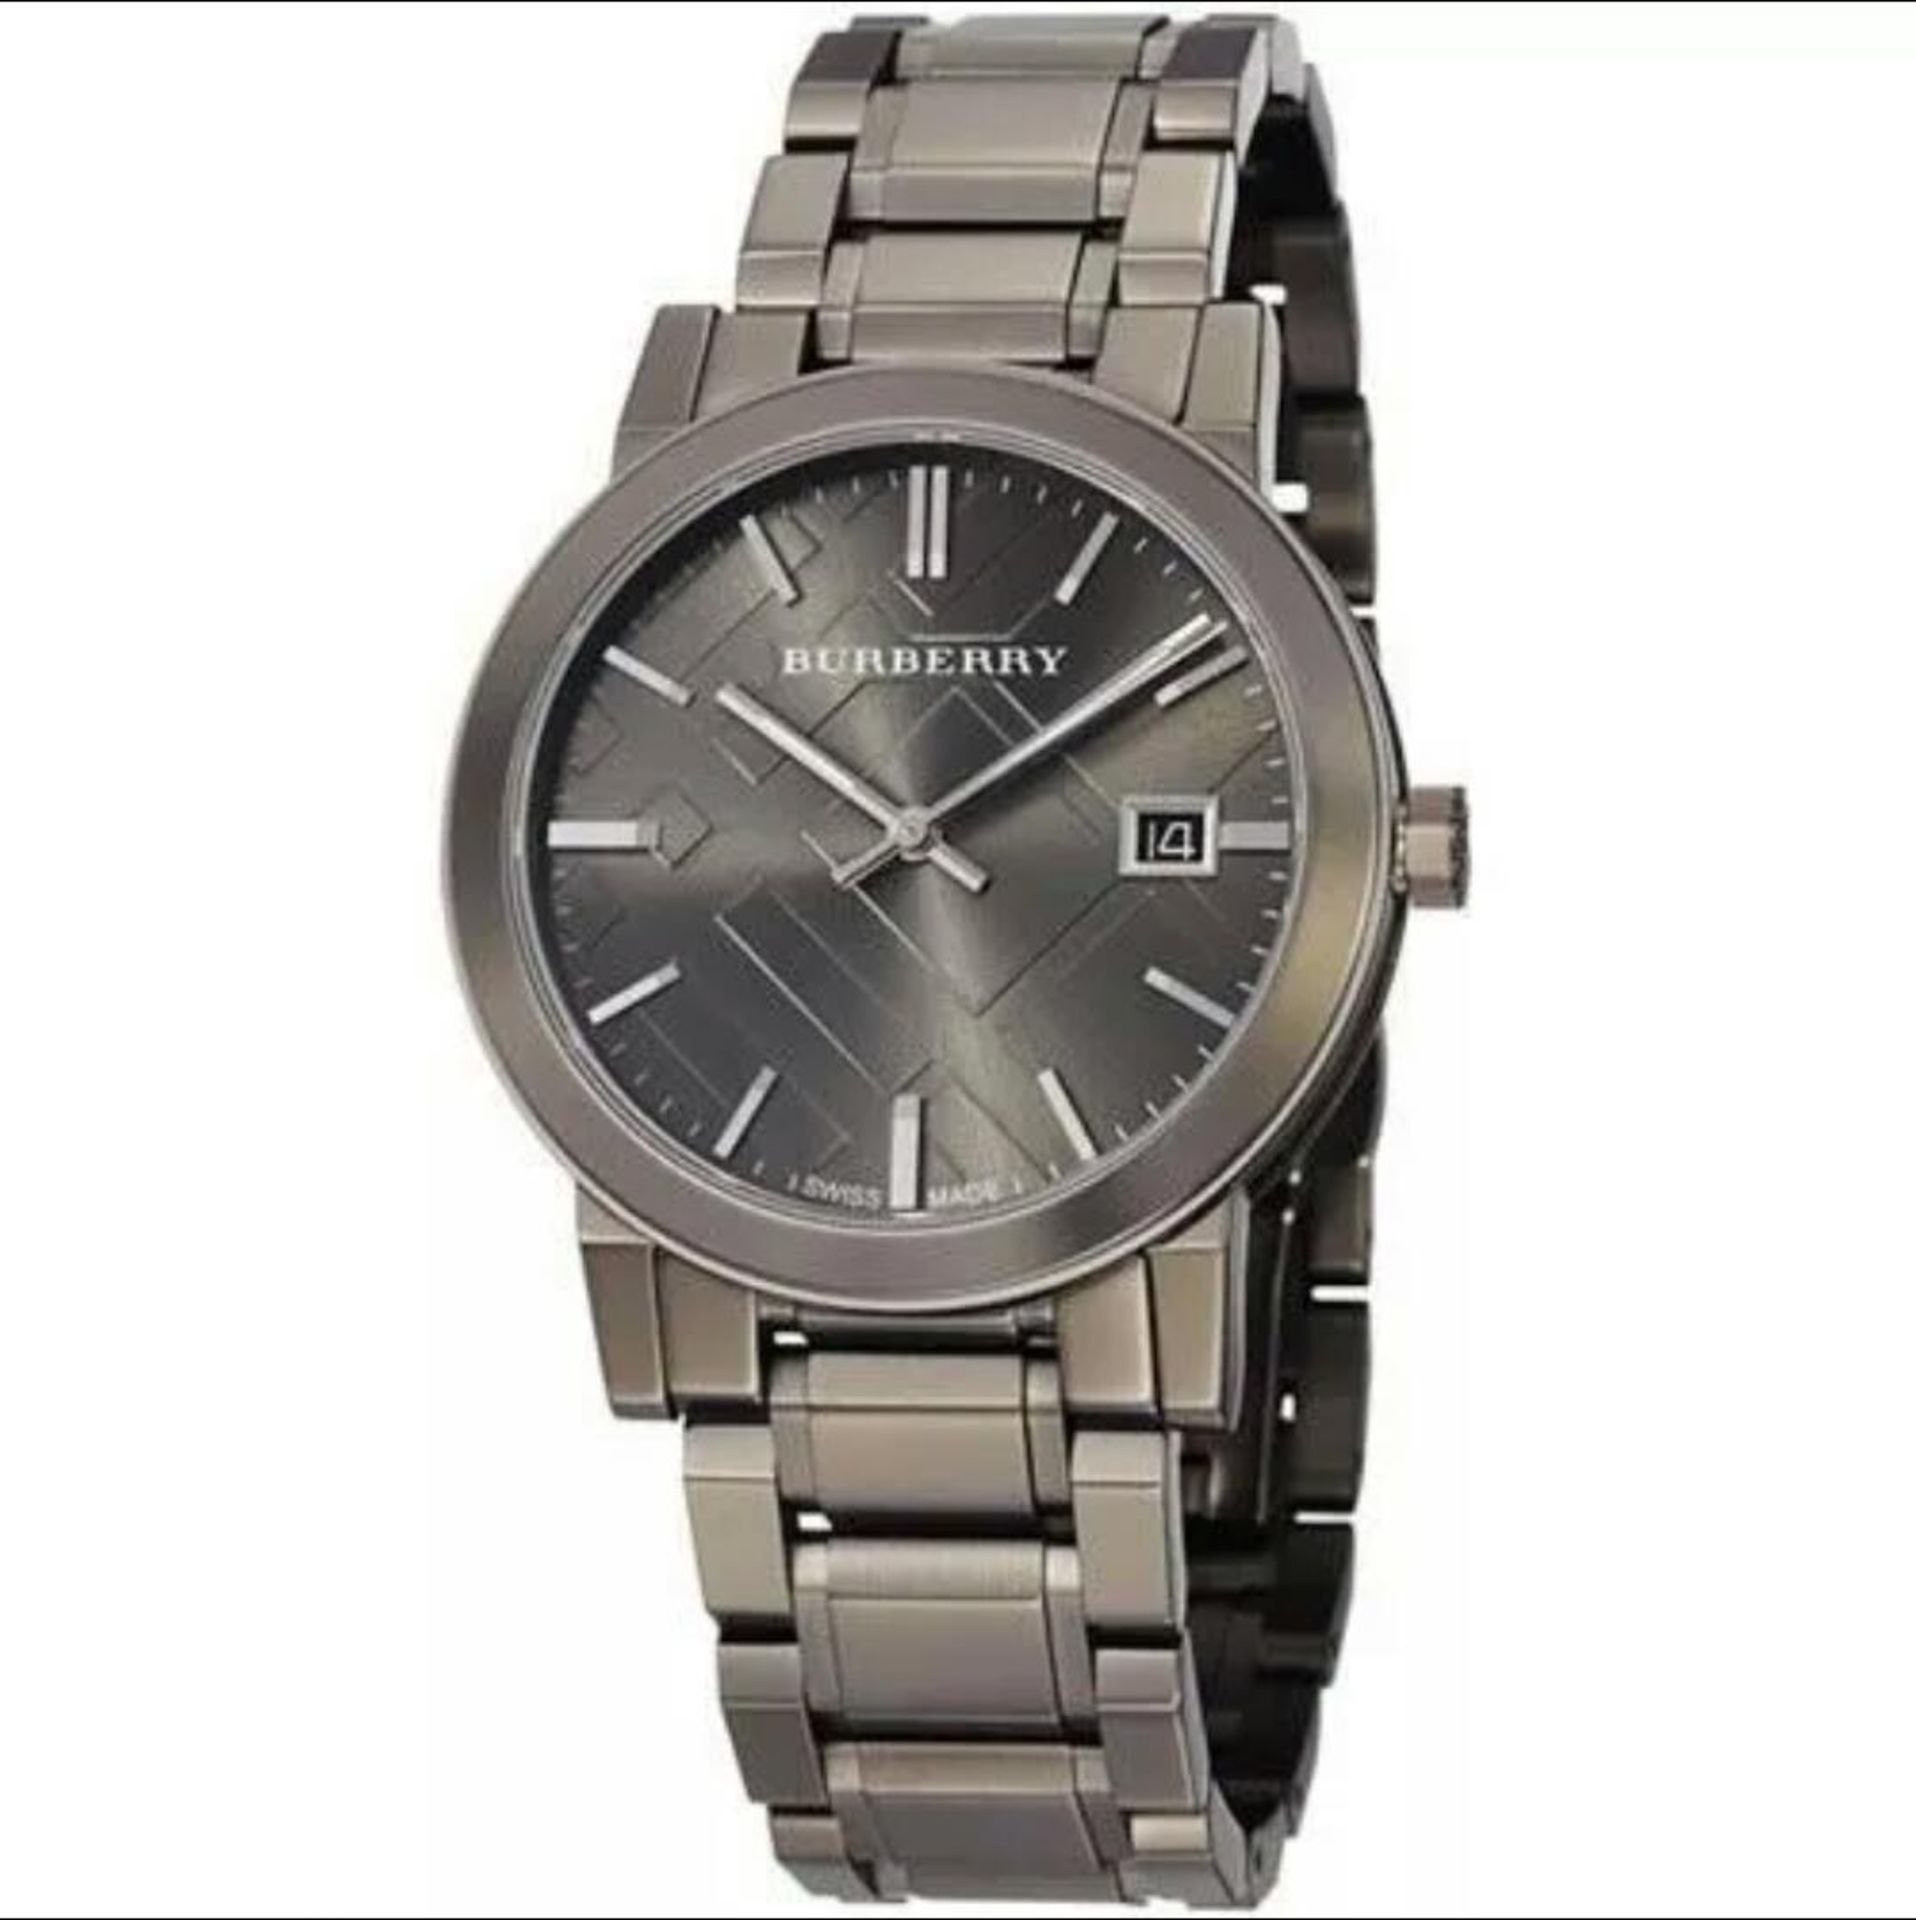 BRAND NEW GENTS BURBERRY WATCH BU9007, COMPLETE WITH ORIGINAL BOX AND MANUAL - RRP £399